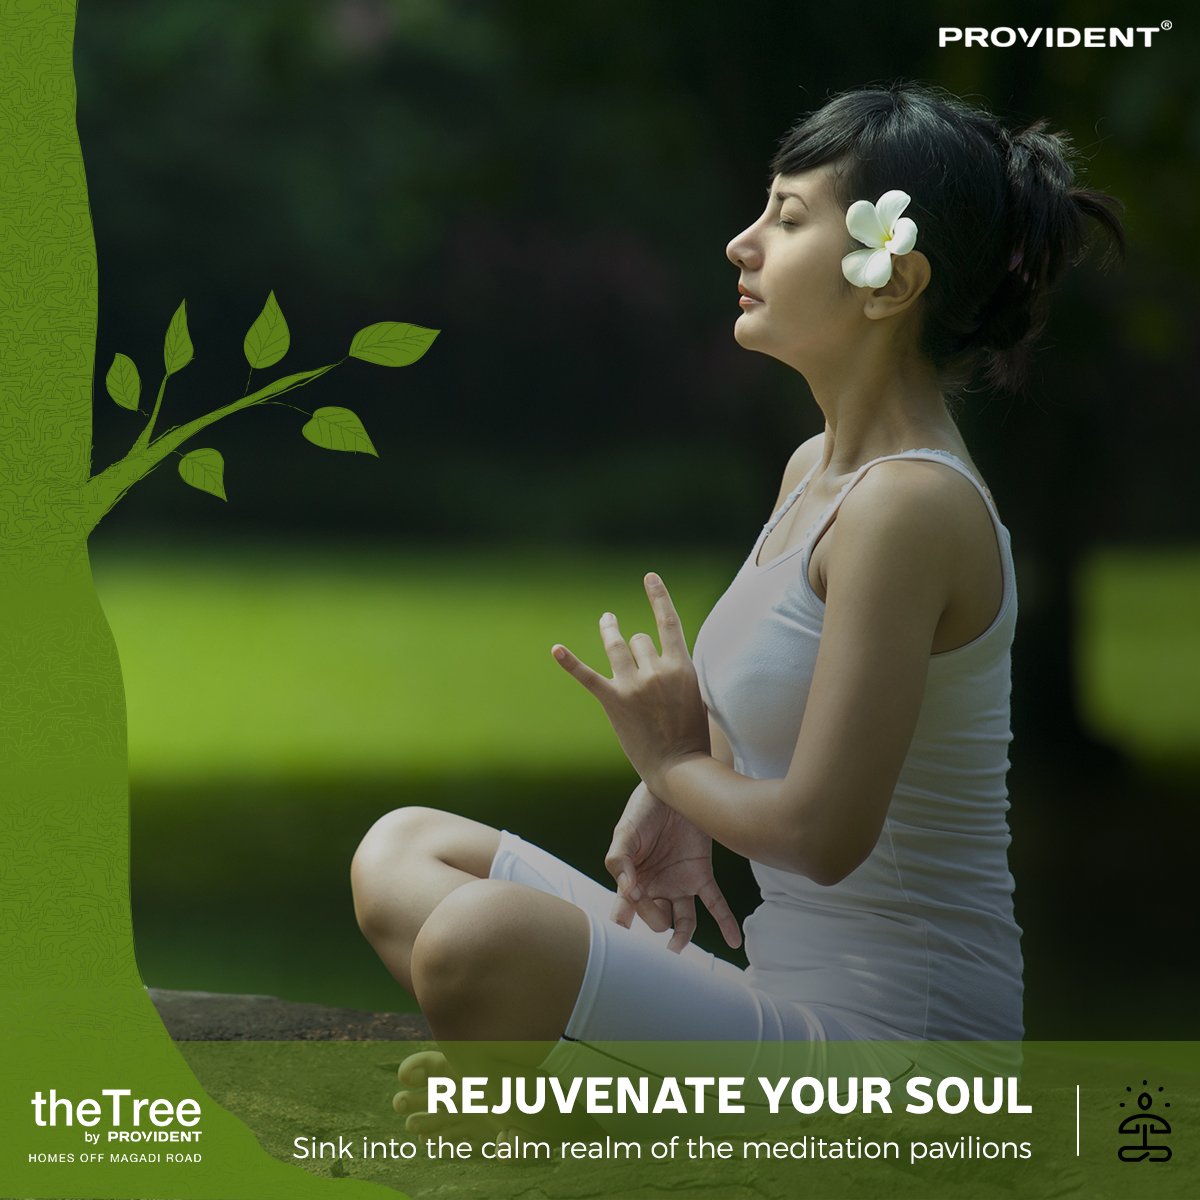 Live a calm and healthy lifestyle at Provident The Tree Update